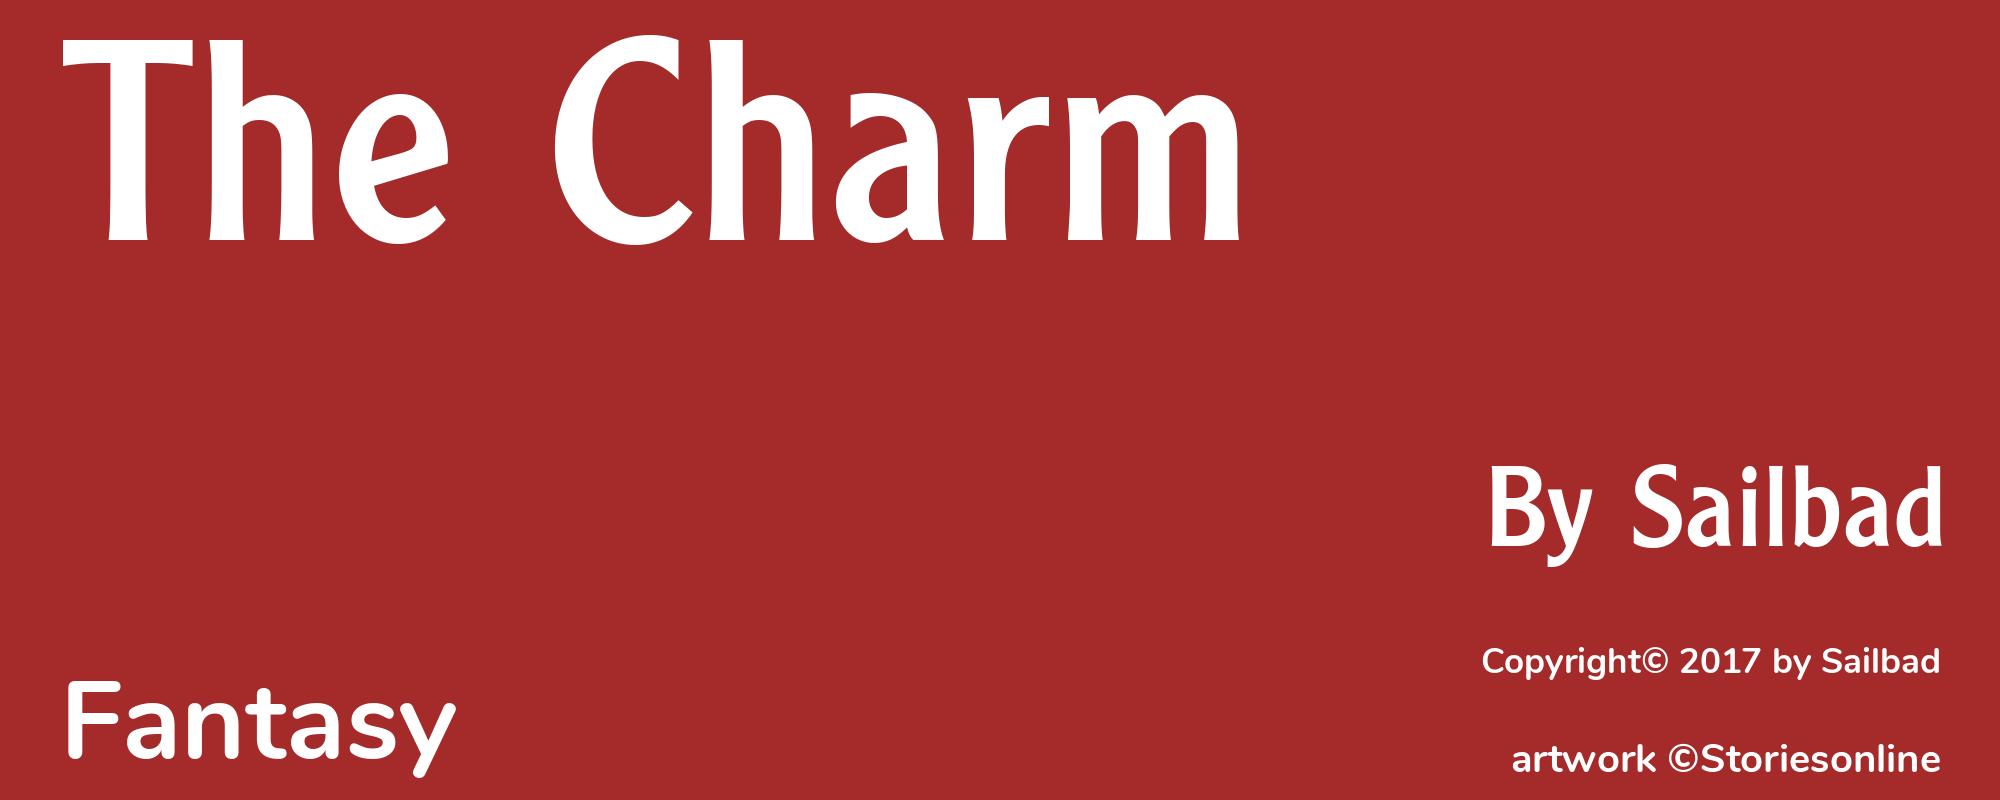 The Charm - Cover